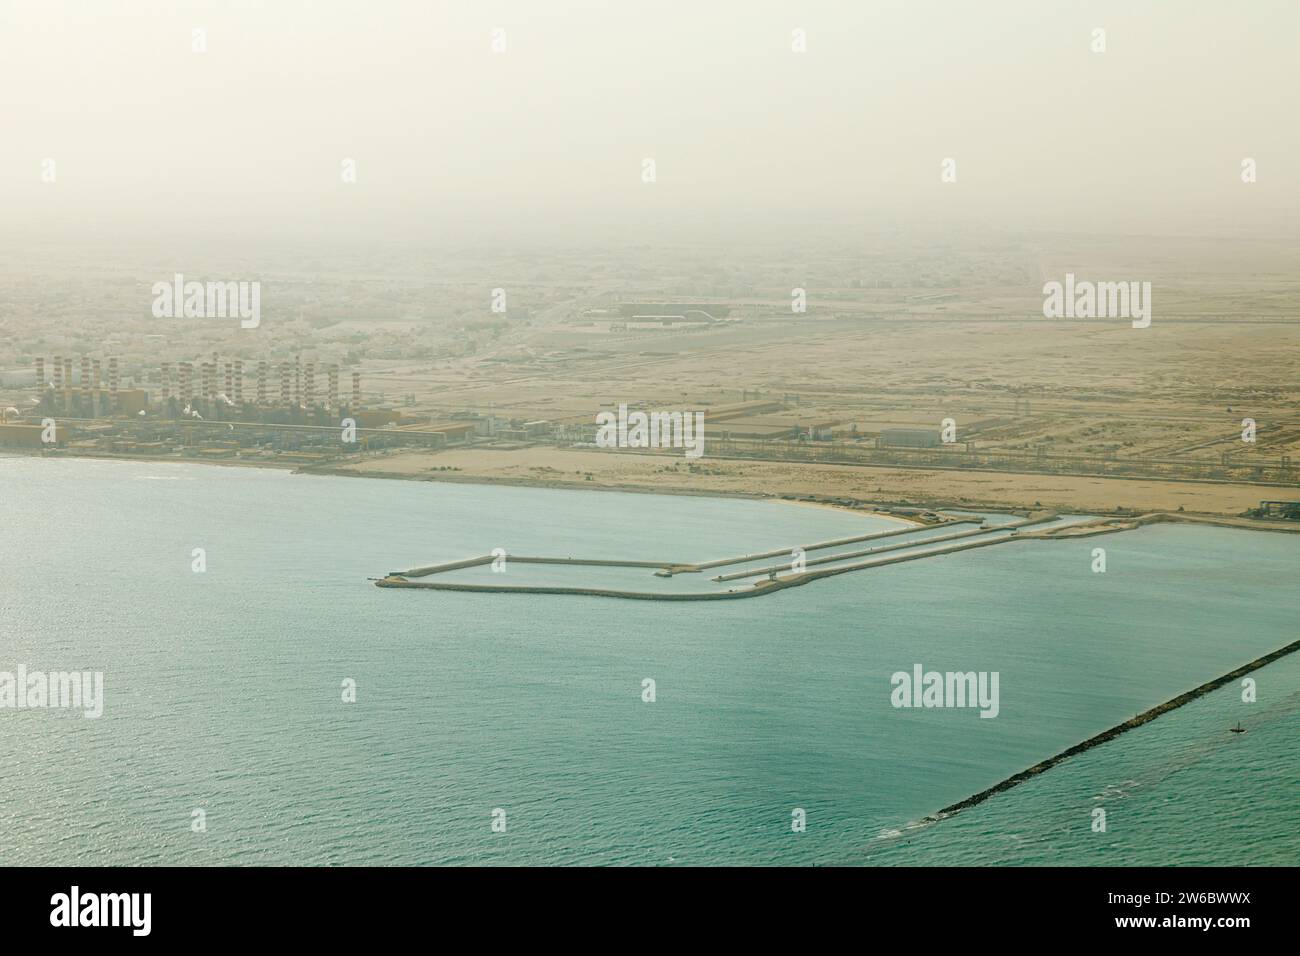 Aerial view of a Liquid Natural Gas Refinery and power plant on the coastline in Doha, Qatar on the Persian Gulf, seen from above on a smoggy day Stock Photo